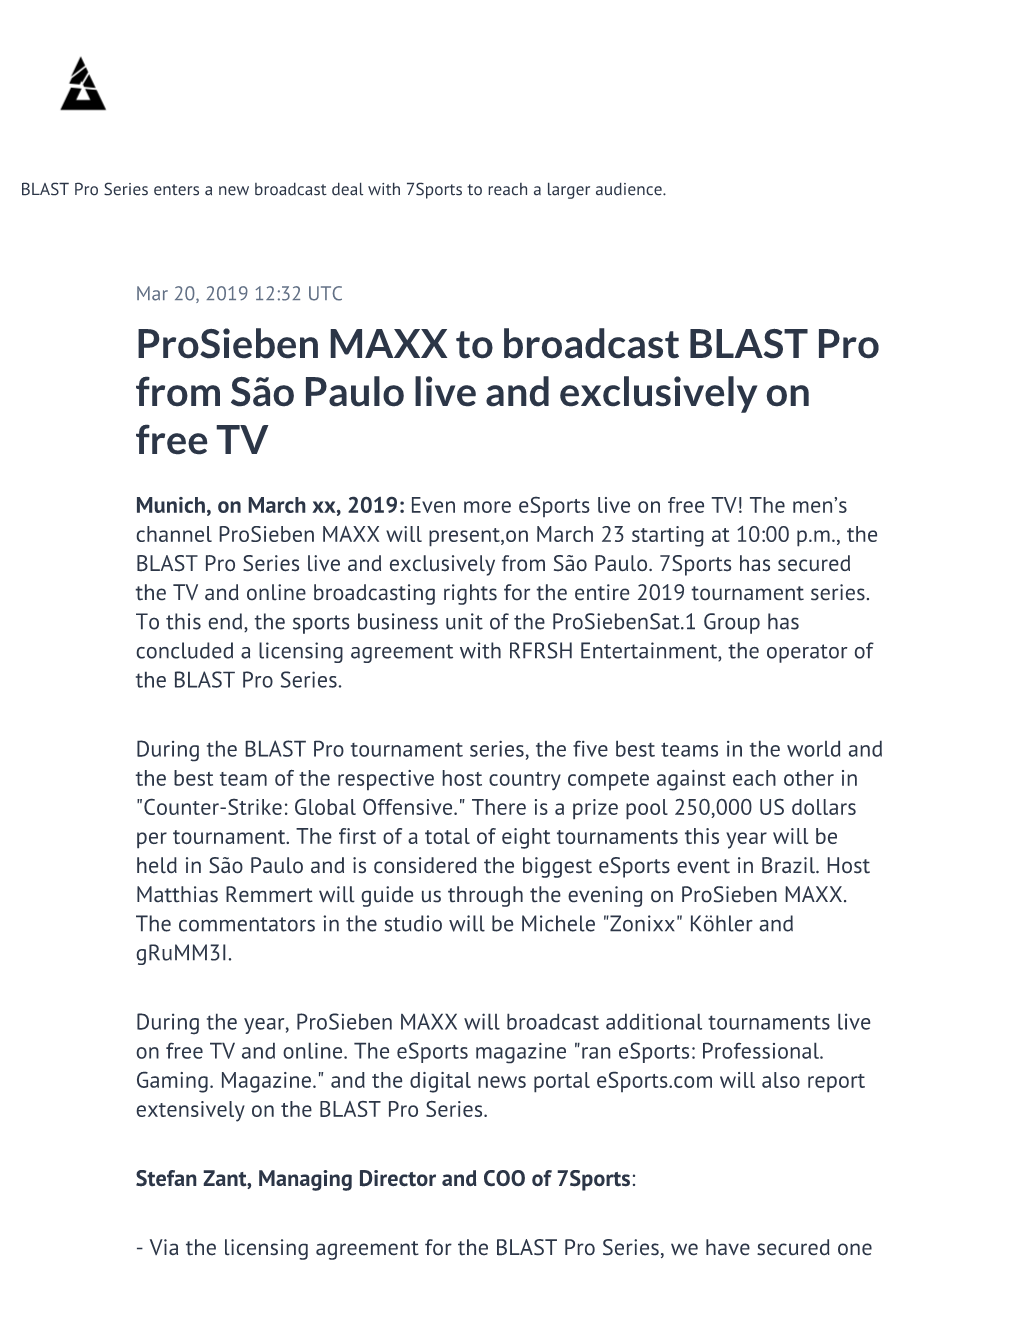 Prosieben MAXX to Broadcast BLAST Pro from São Paulo Live and Exclusively on Free TV